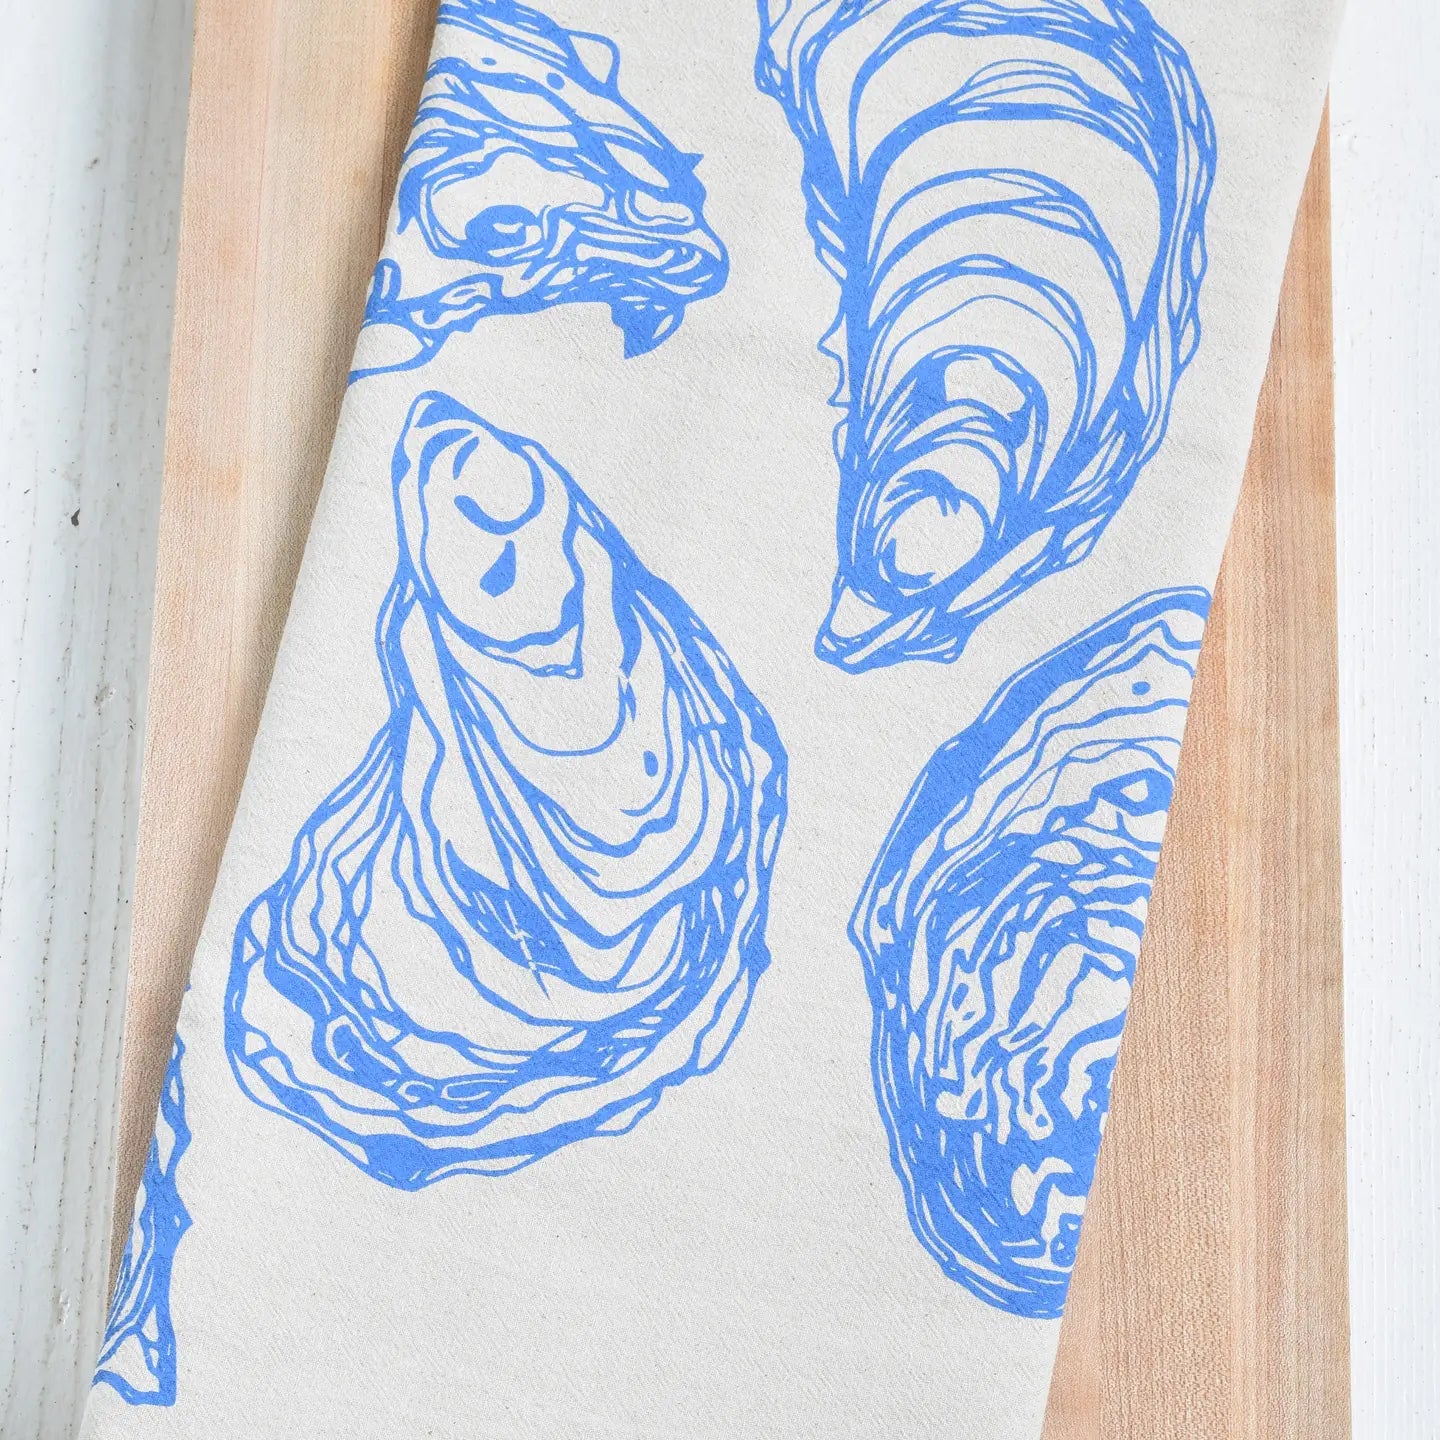 Oyster Tea Towel in Blue-Violet - Organic Cotton - Sea Shell